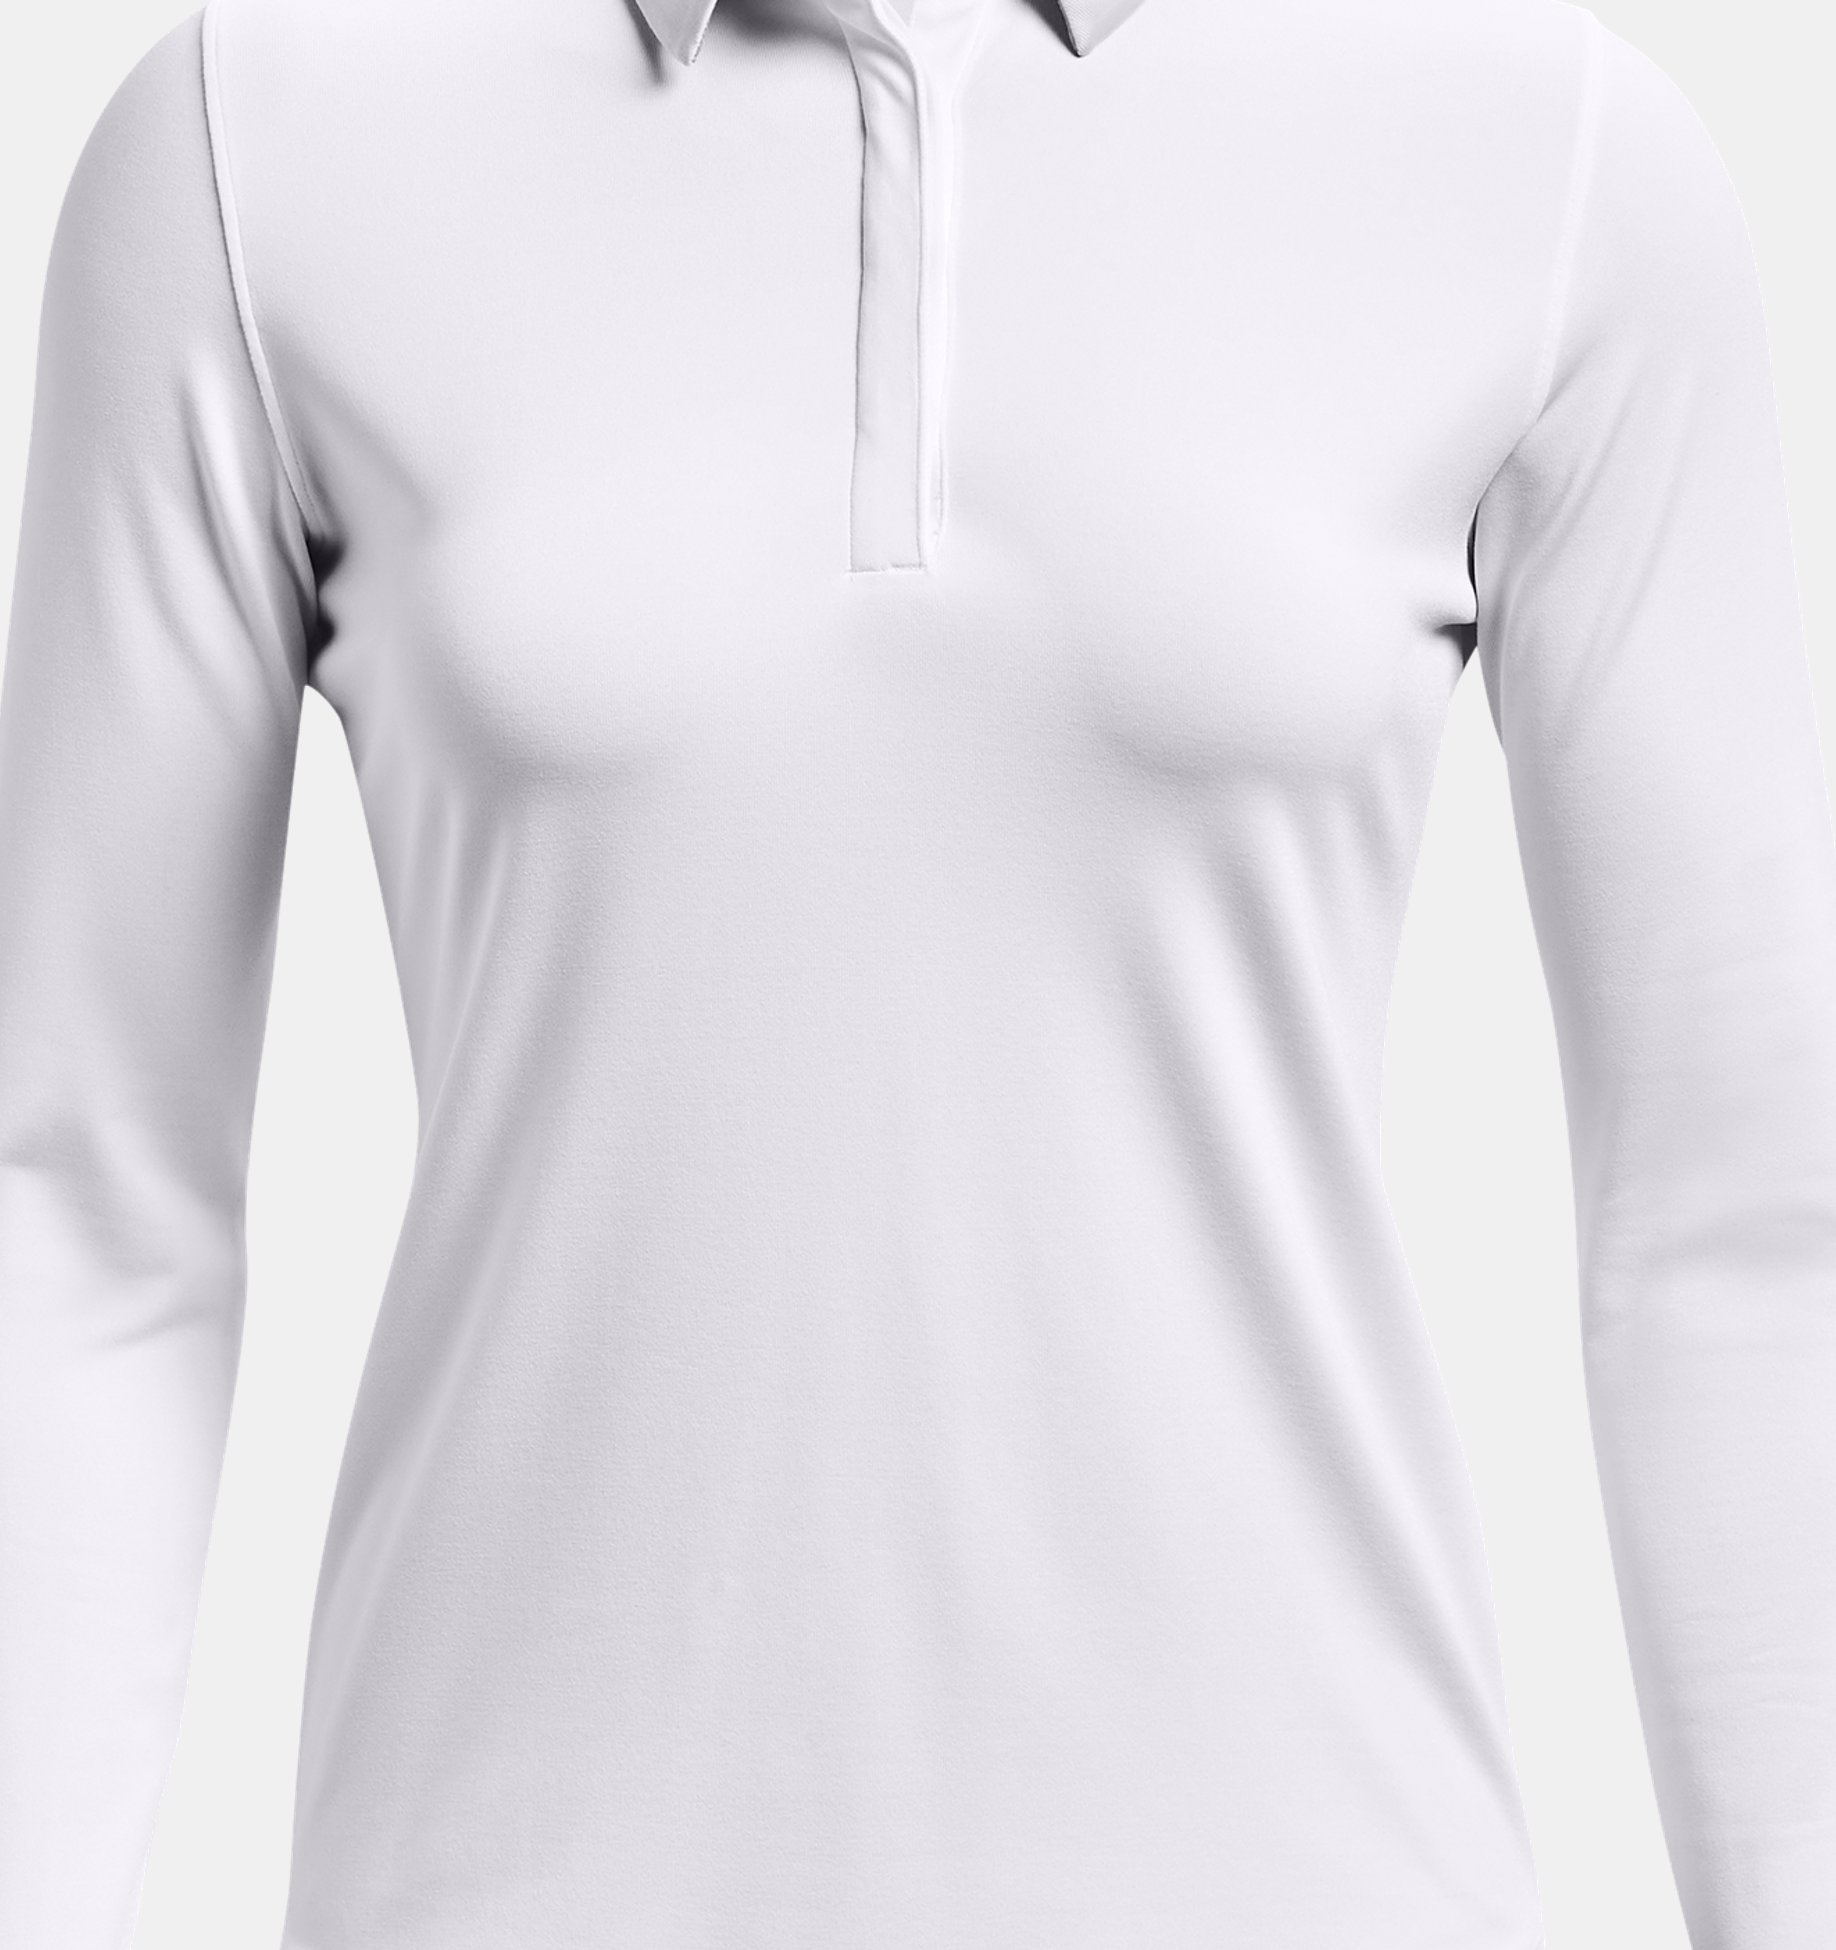 Under Armour Women's Zinger Golf Polo - Carl's Golfland